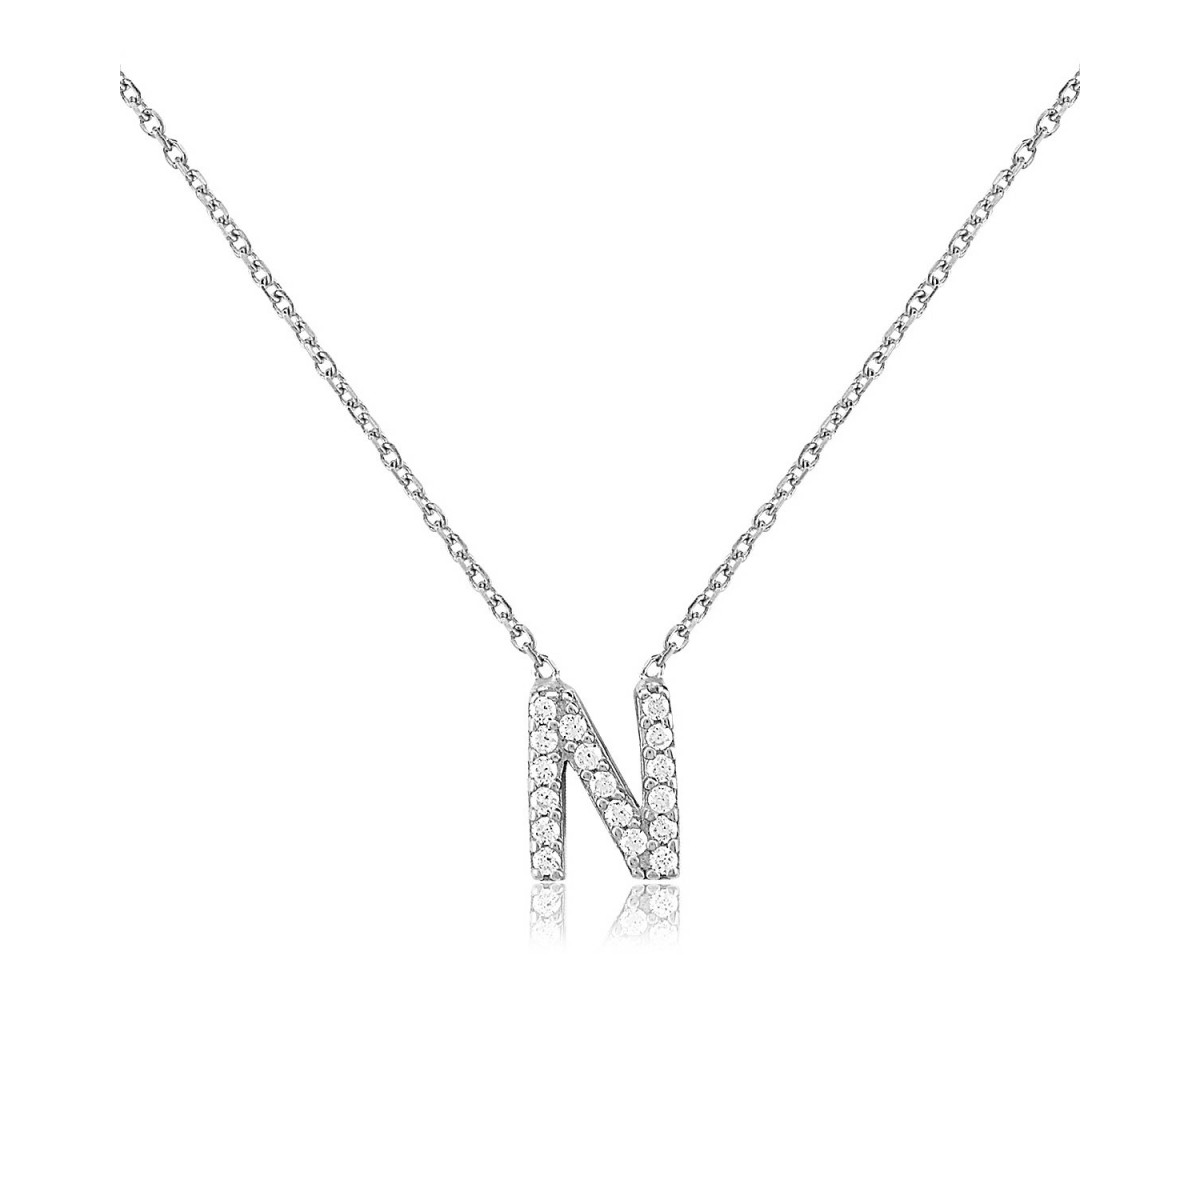 NOTABLE OFFSET INITIAL NECKLACE - N - SO PRETTY CARA COTTER